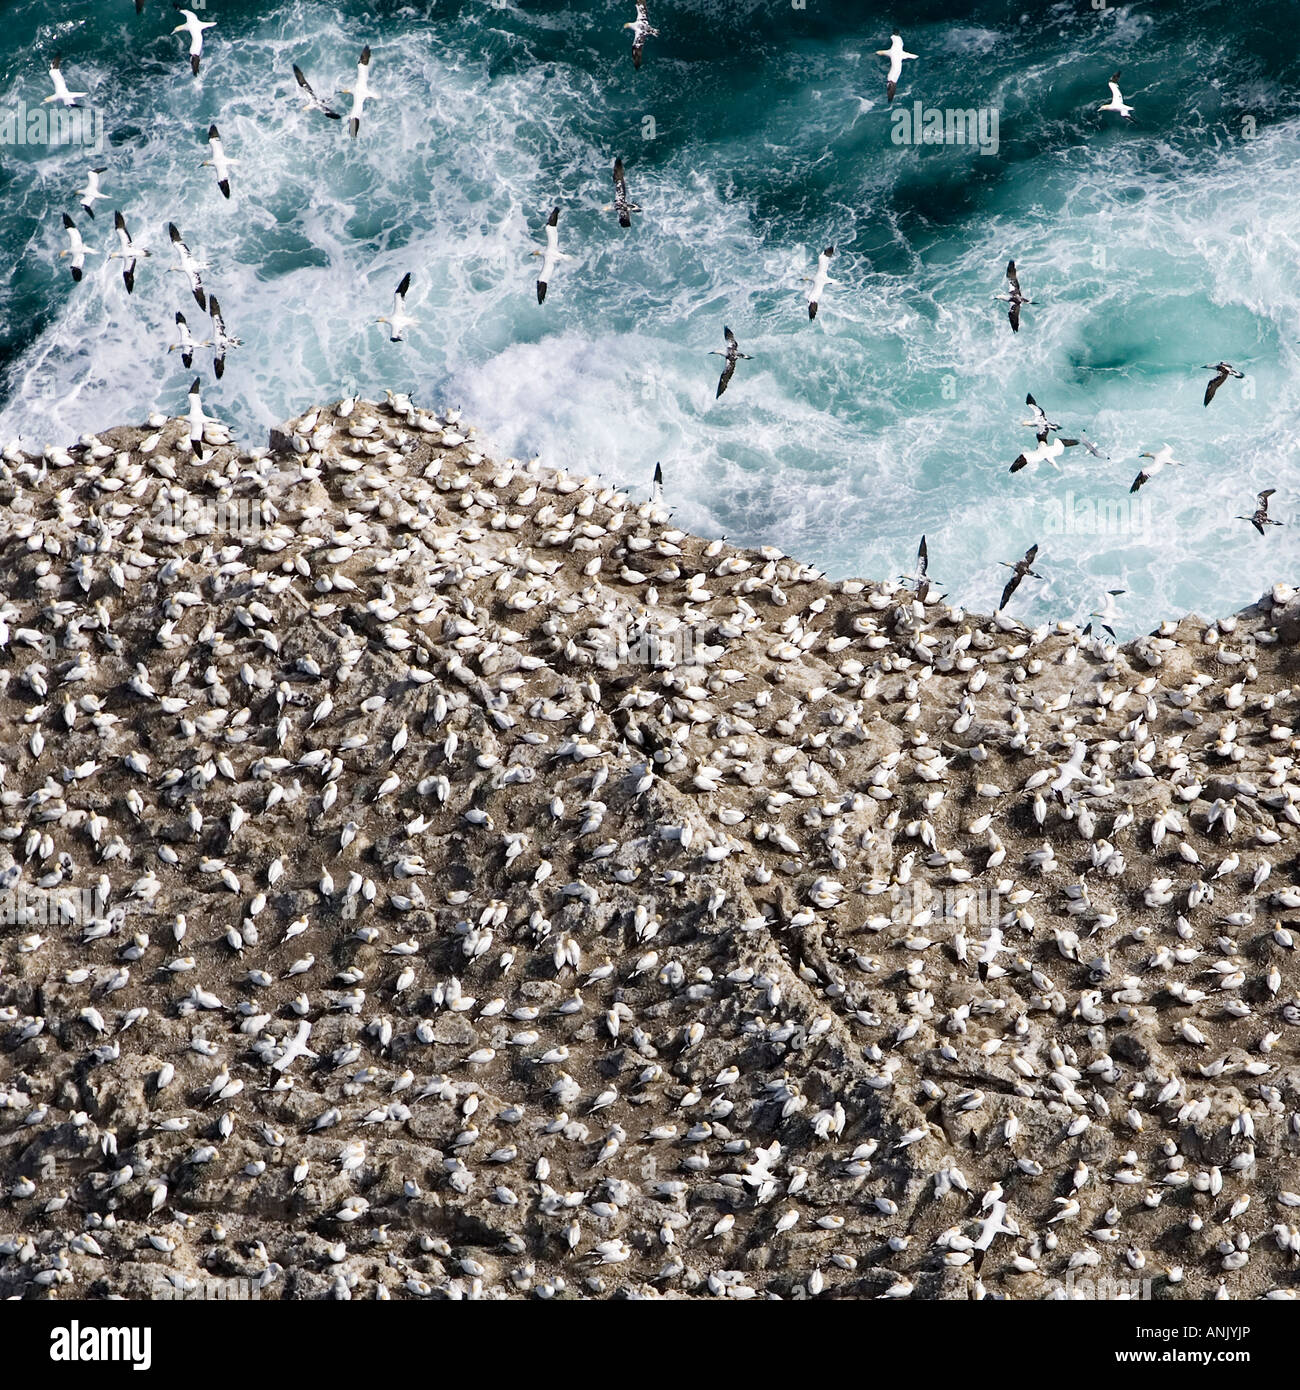 Aerial photographs of birds in the cliffs of island Eldey Stock Photo